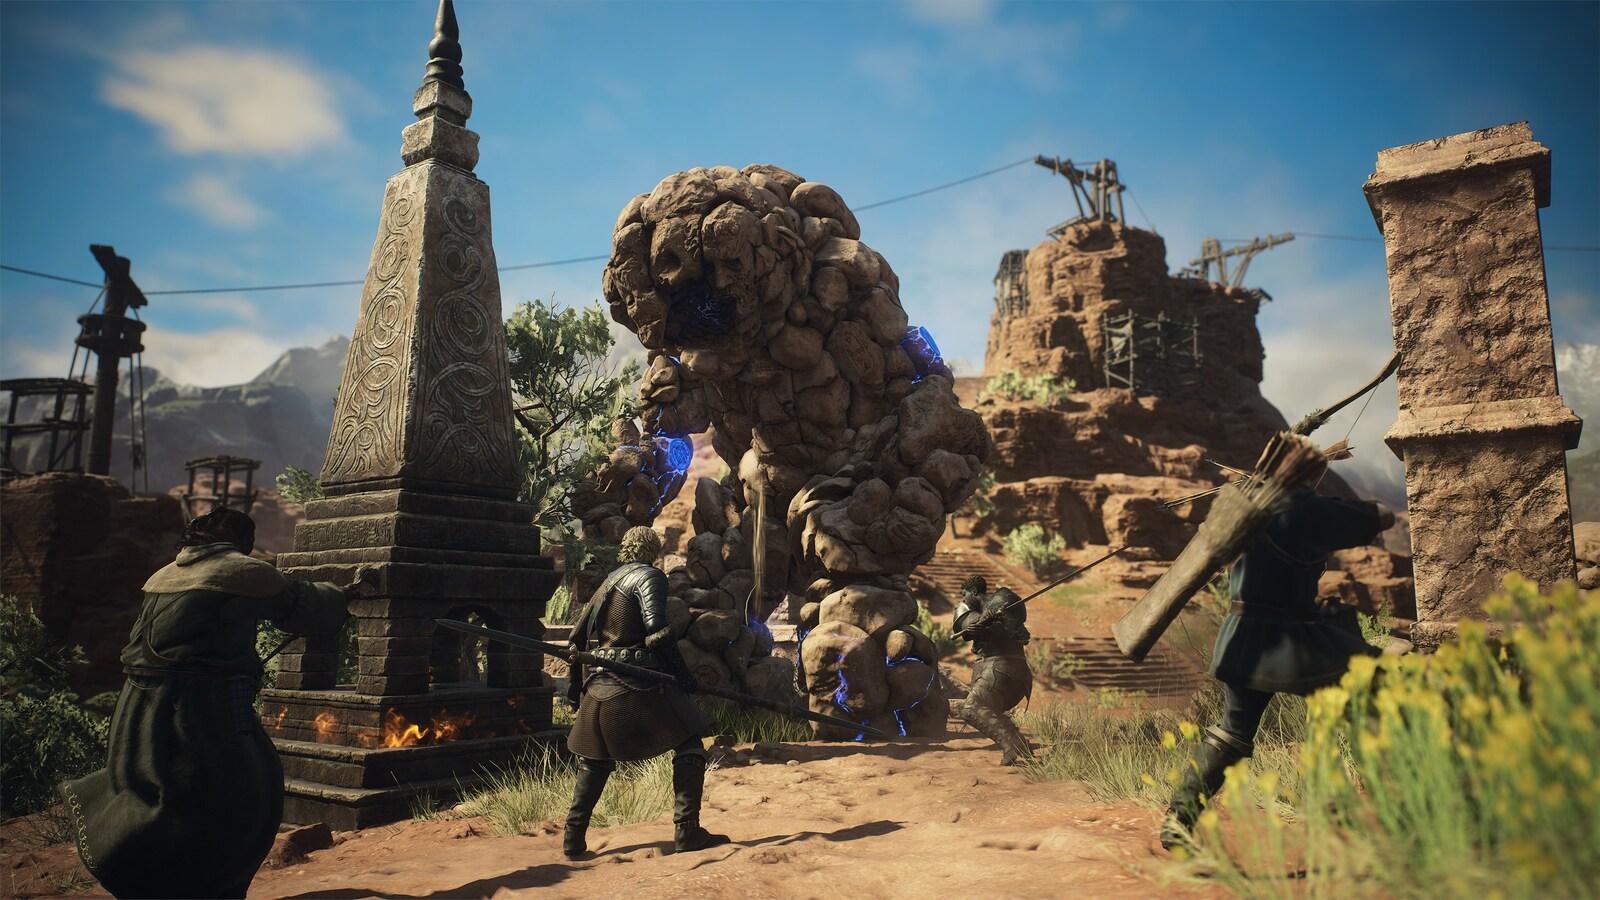 A group fights a Golem in Dragon's Dogma 2